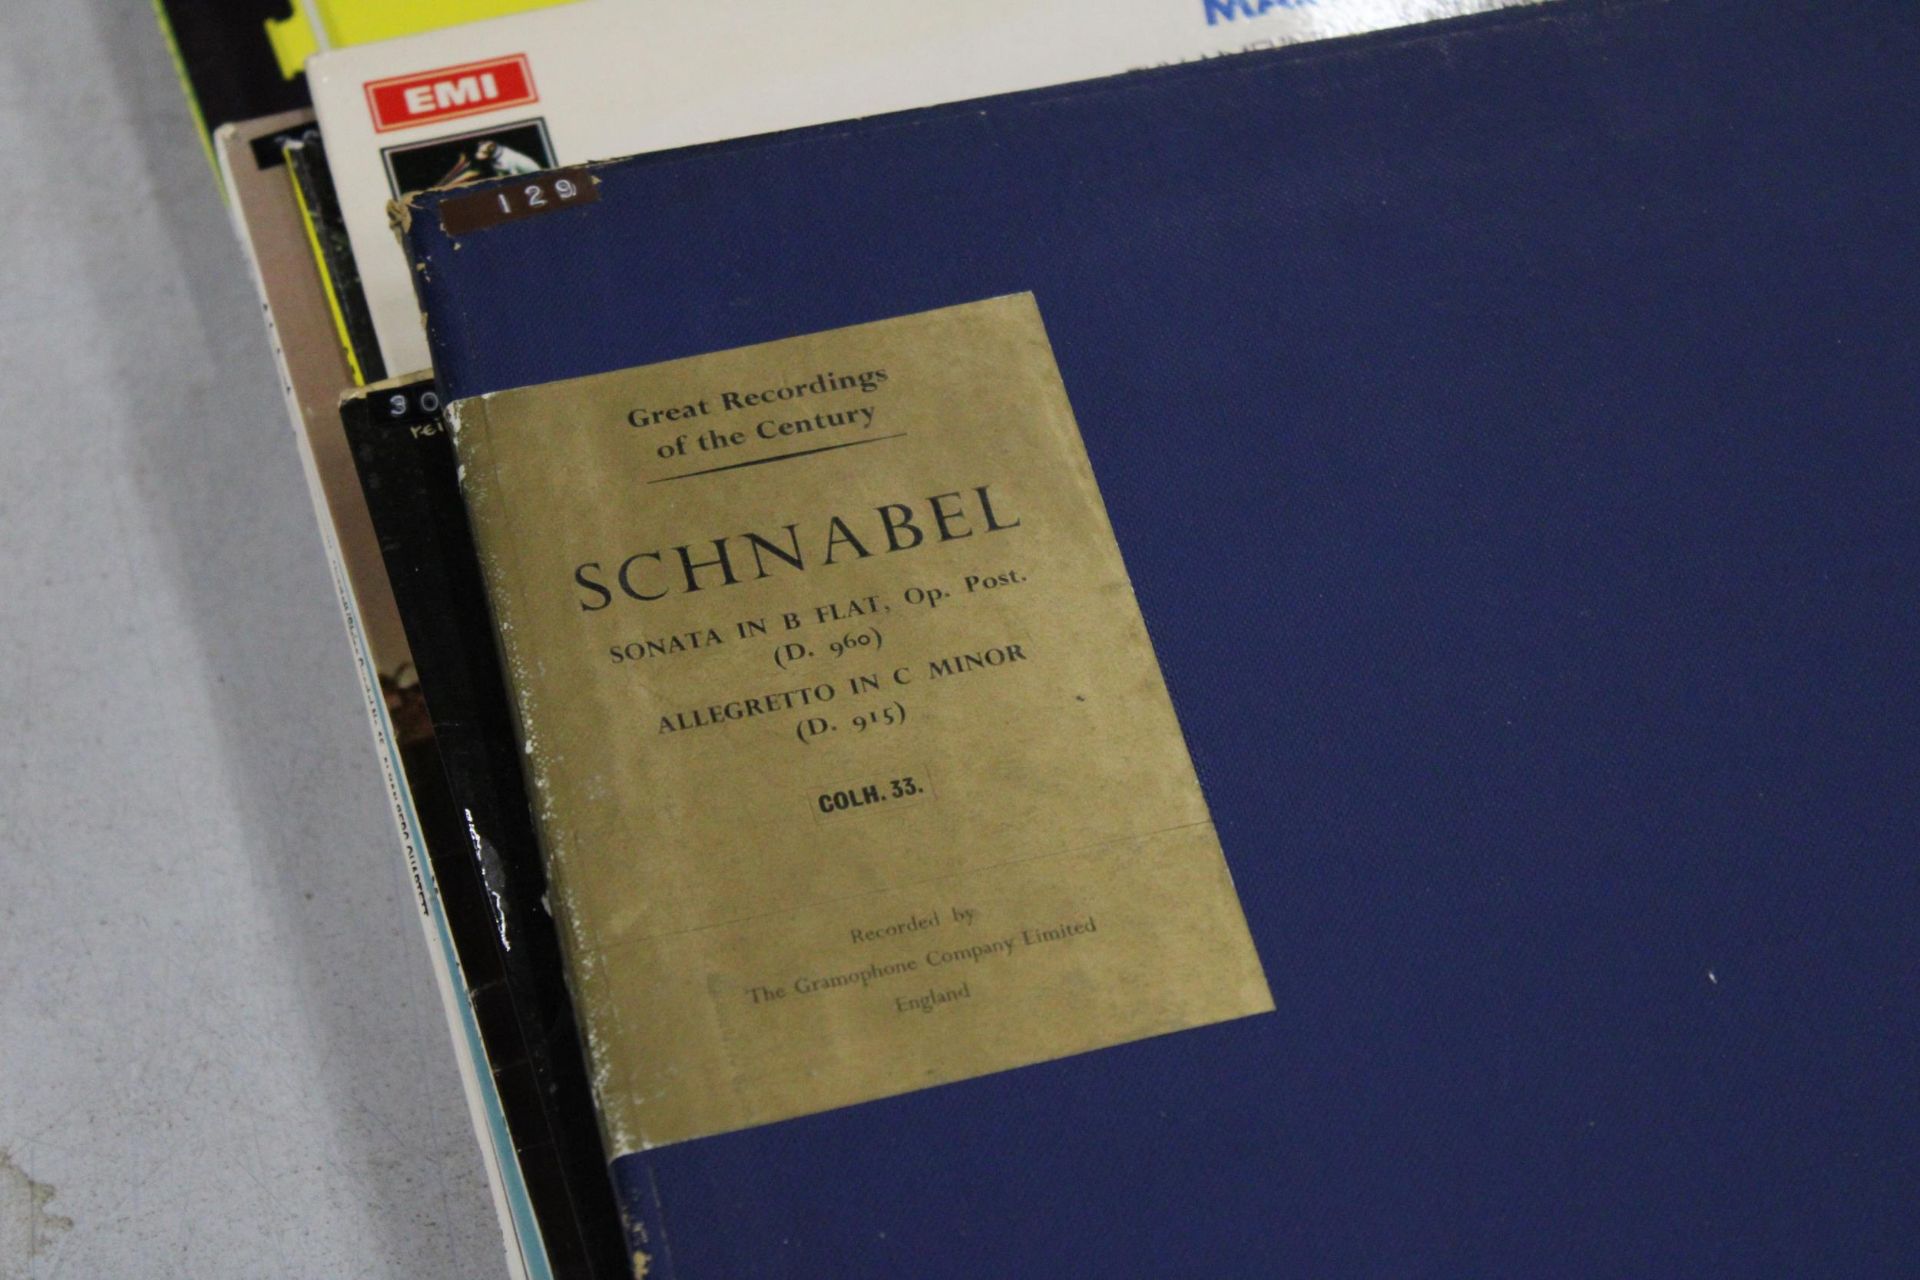 A COLLECTION OF VINTAGE CLASSICAL VINYL LP'S TO INCLUDE SCHUMANN, BEETHOVEN, ETC - Image 3 of 5